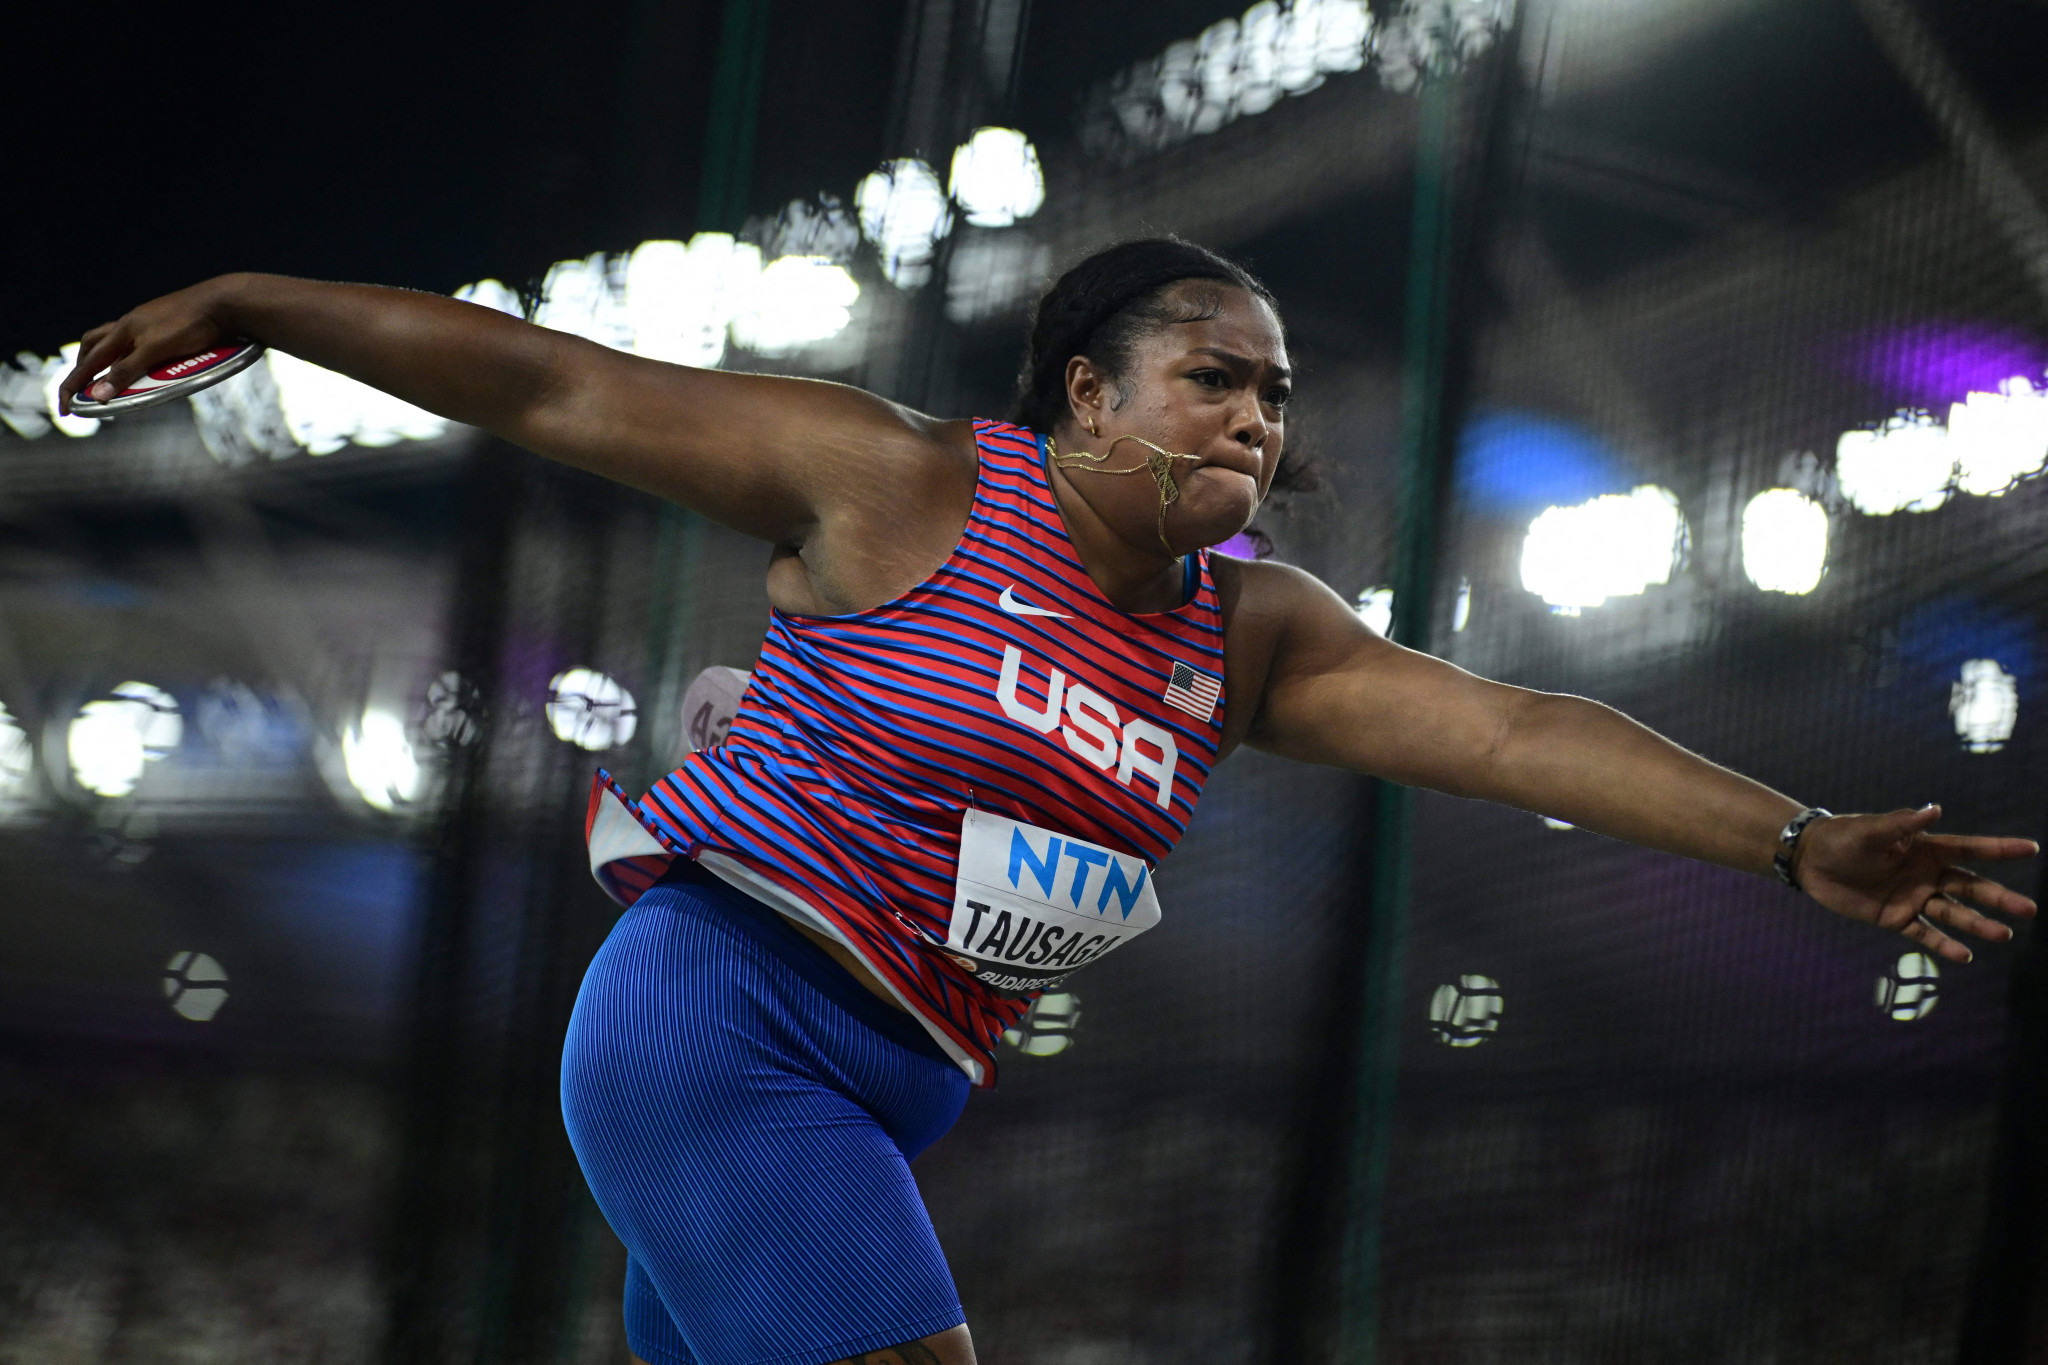 Laulauga Tausaga of the US threw a personal best 69.49m for women's discus gold at the World Athletics Championships ©Getty Images